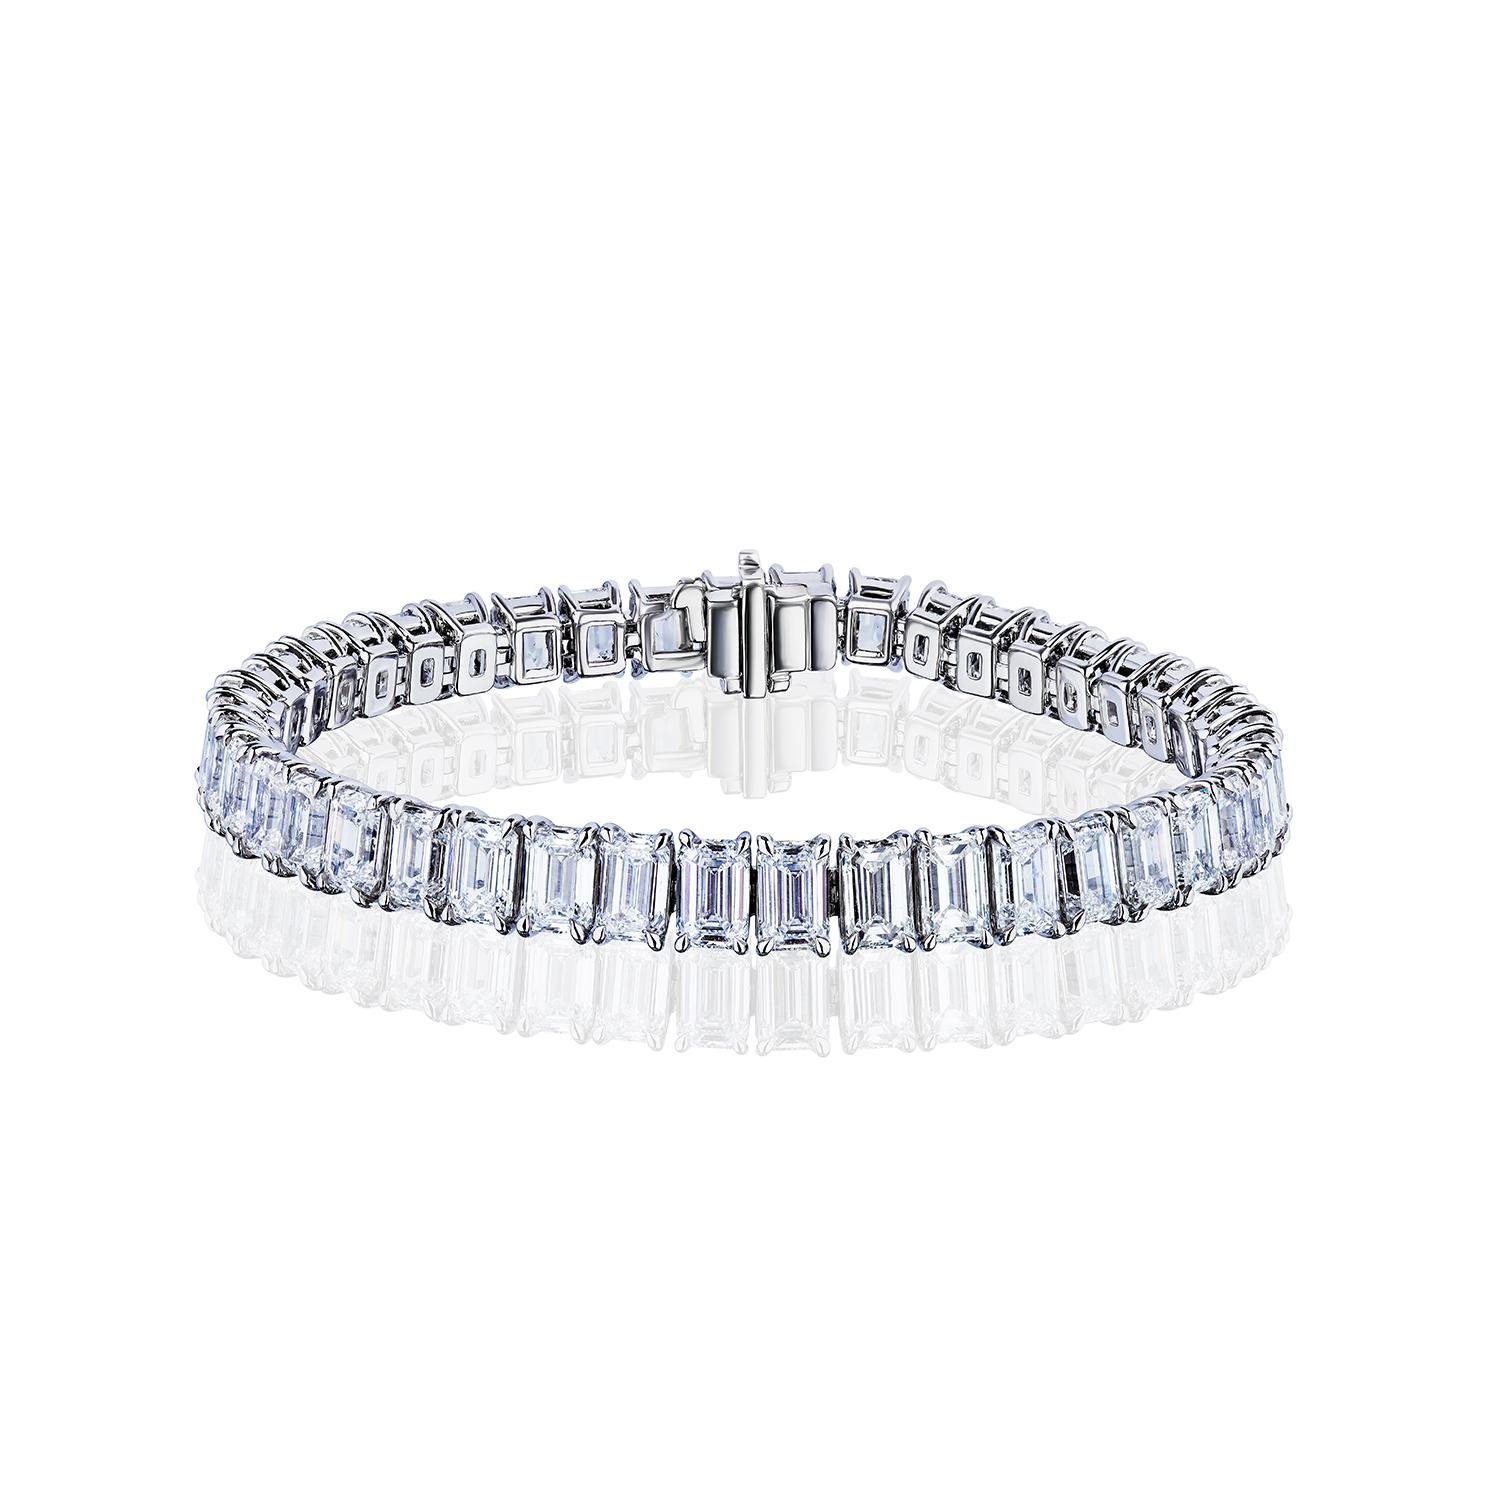 The Ultimate Diamond Tennis Bracelet. 

Perfectly Cut and Perfectly Matched Emerald Cut Diamonds in a straight line Tennis Bracelet.
43 Diamonds, weighing a total of 21.30 Carats.
F-G Color and VS Clarity.

Set in Platinum, 6.75 inches.